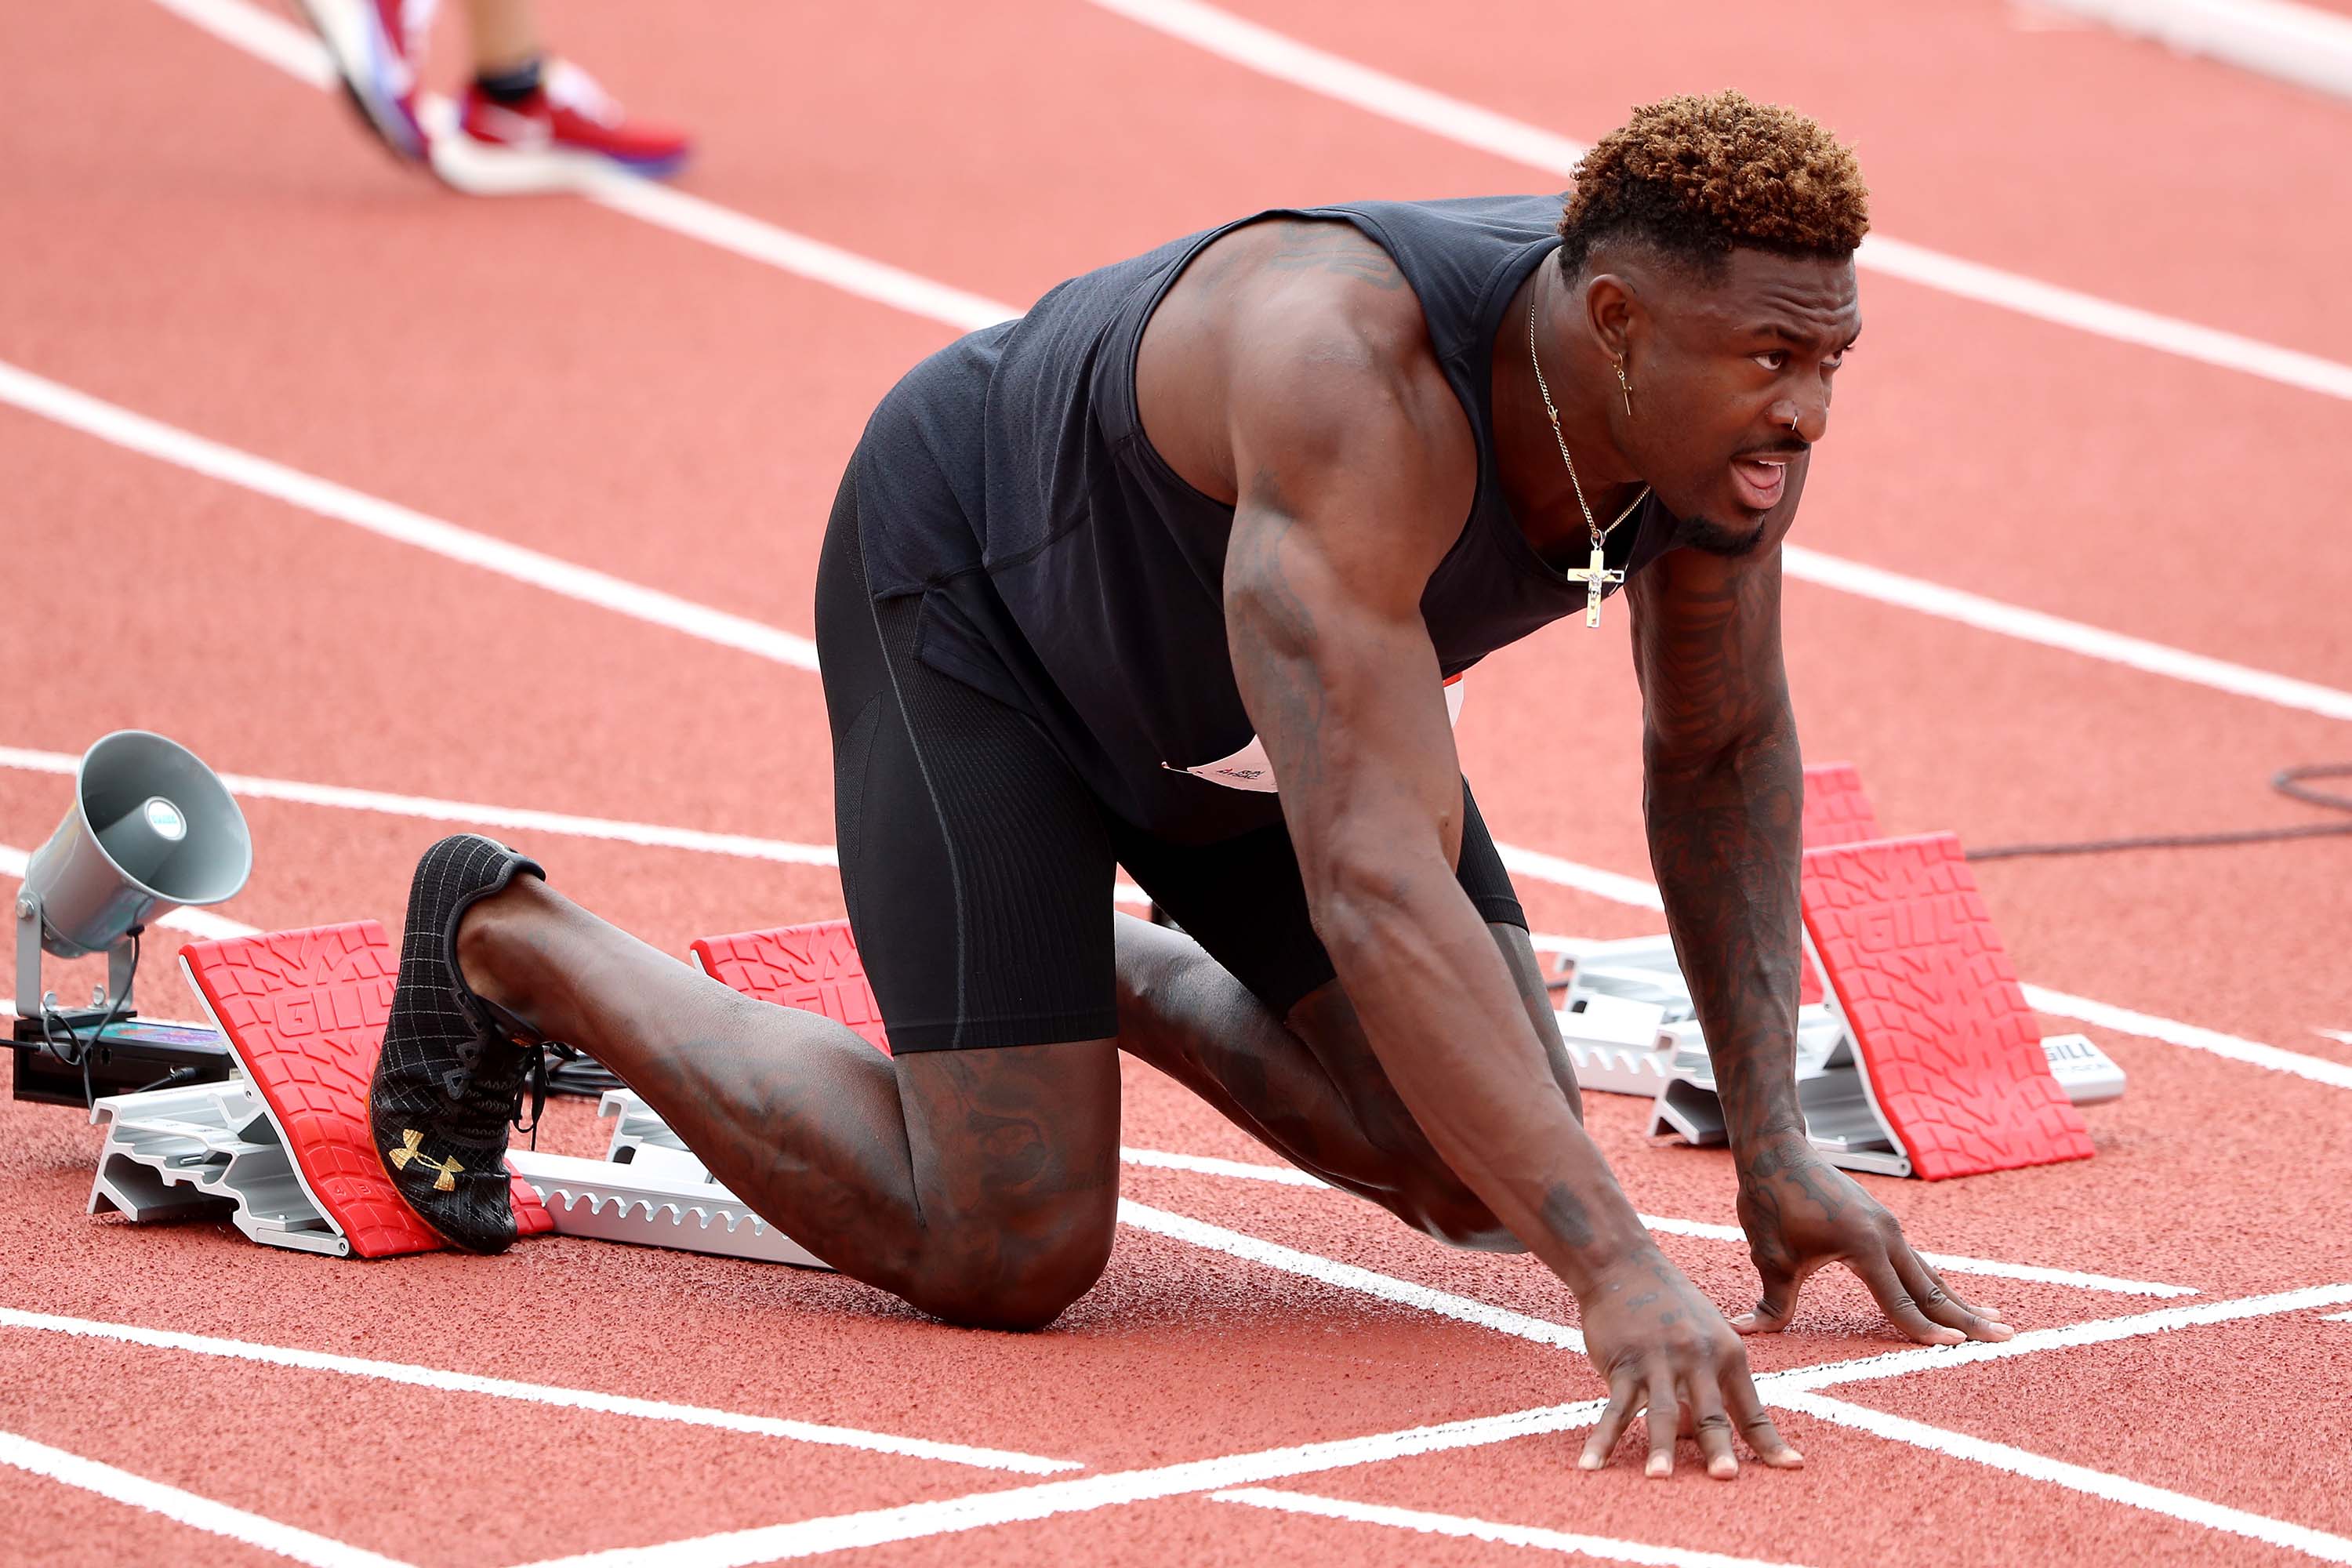 DK Metcalf keeps pace with Olympic-caliber sprinters in track debut